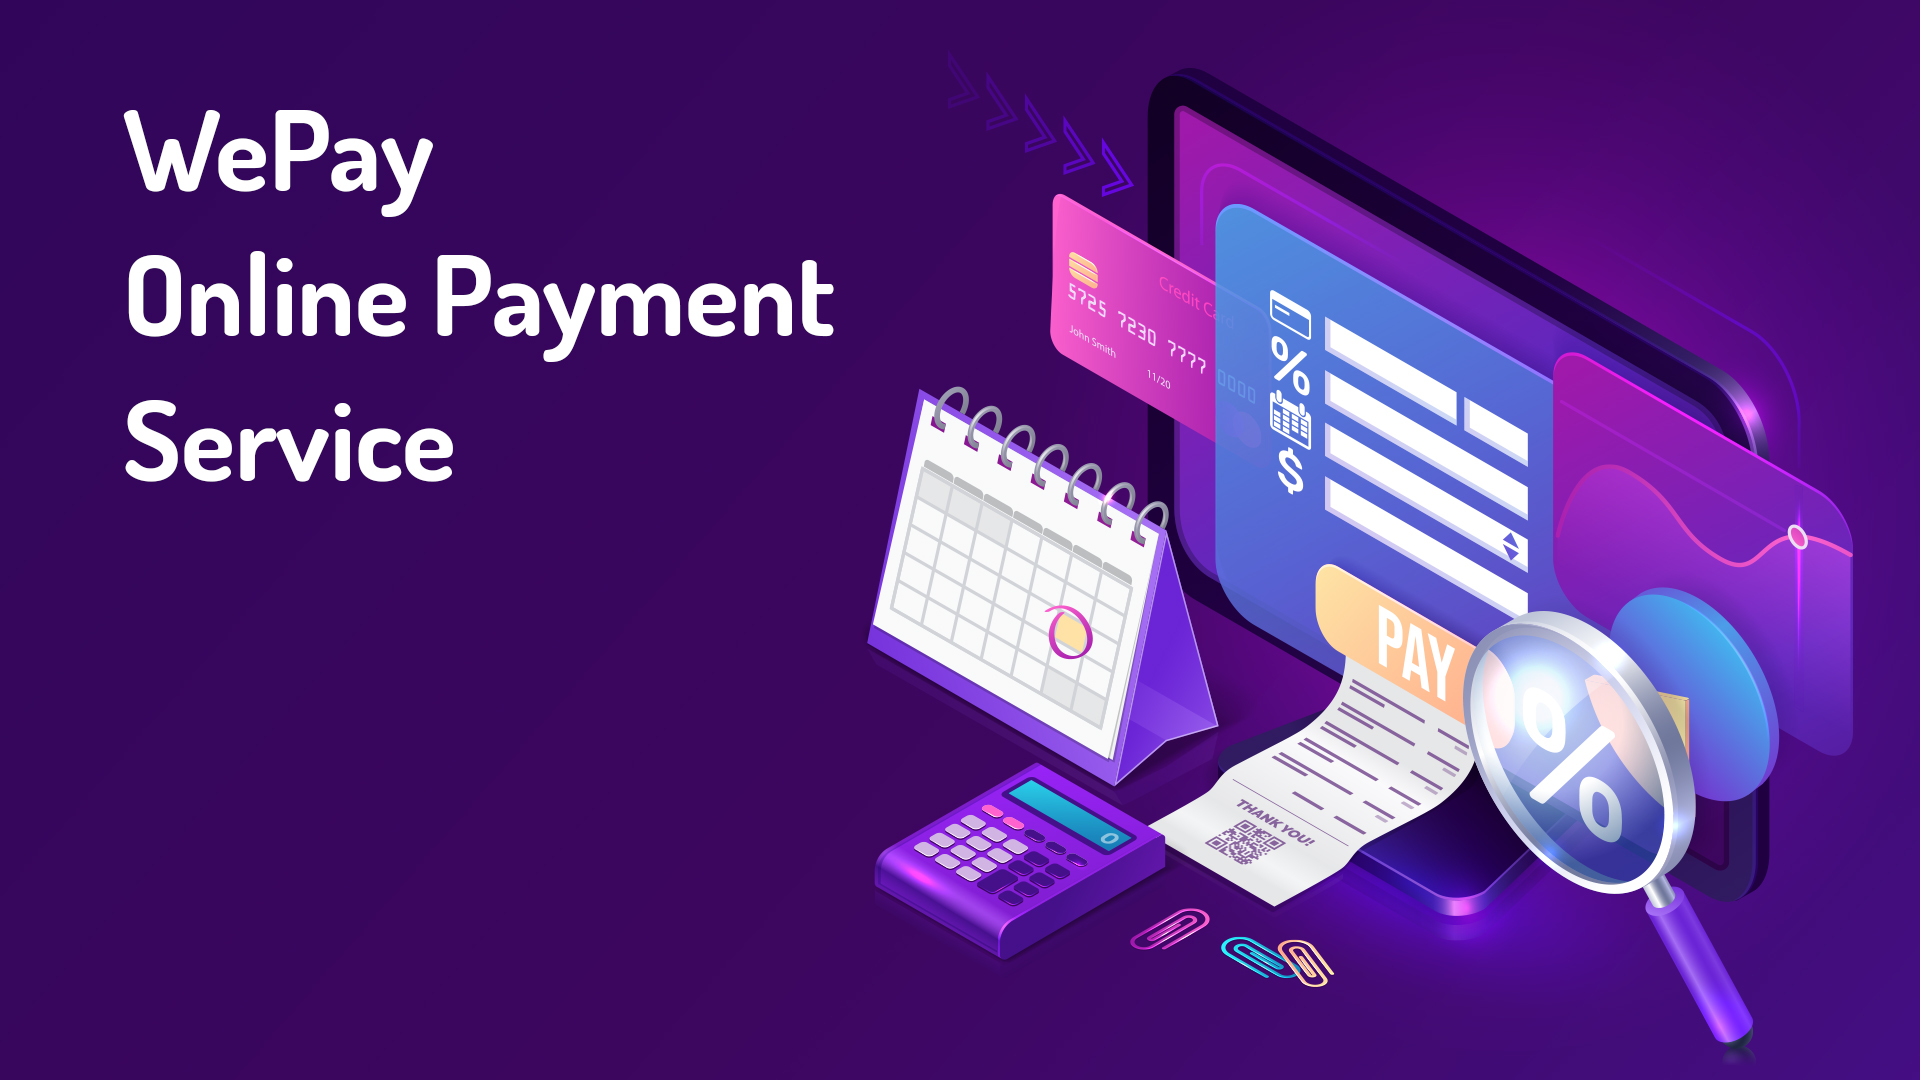 WePay - Online Payment Service